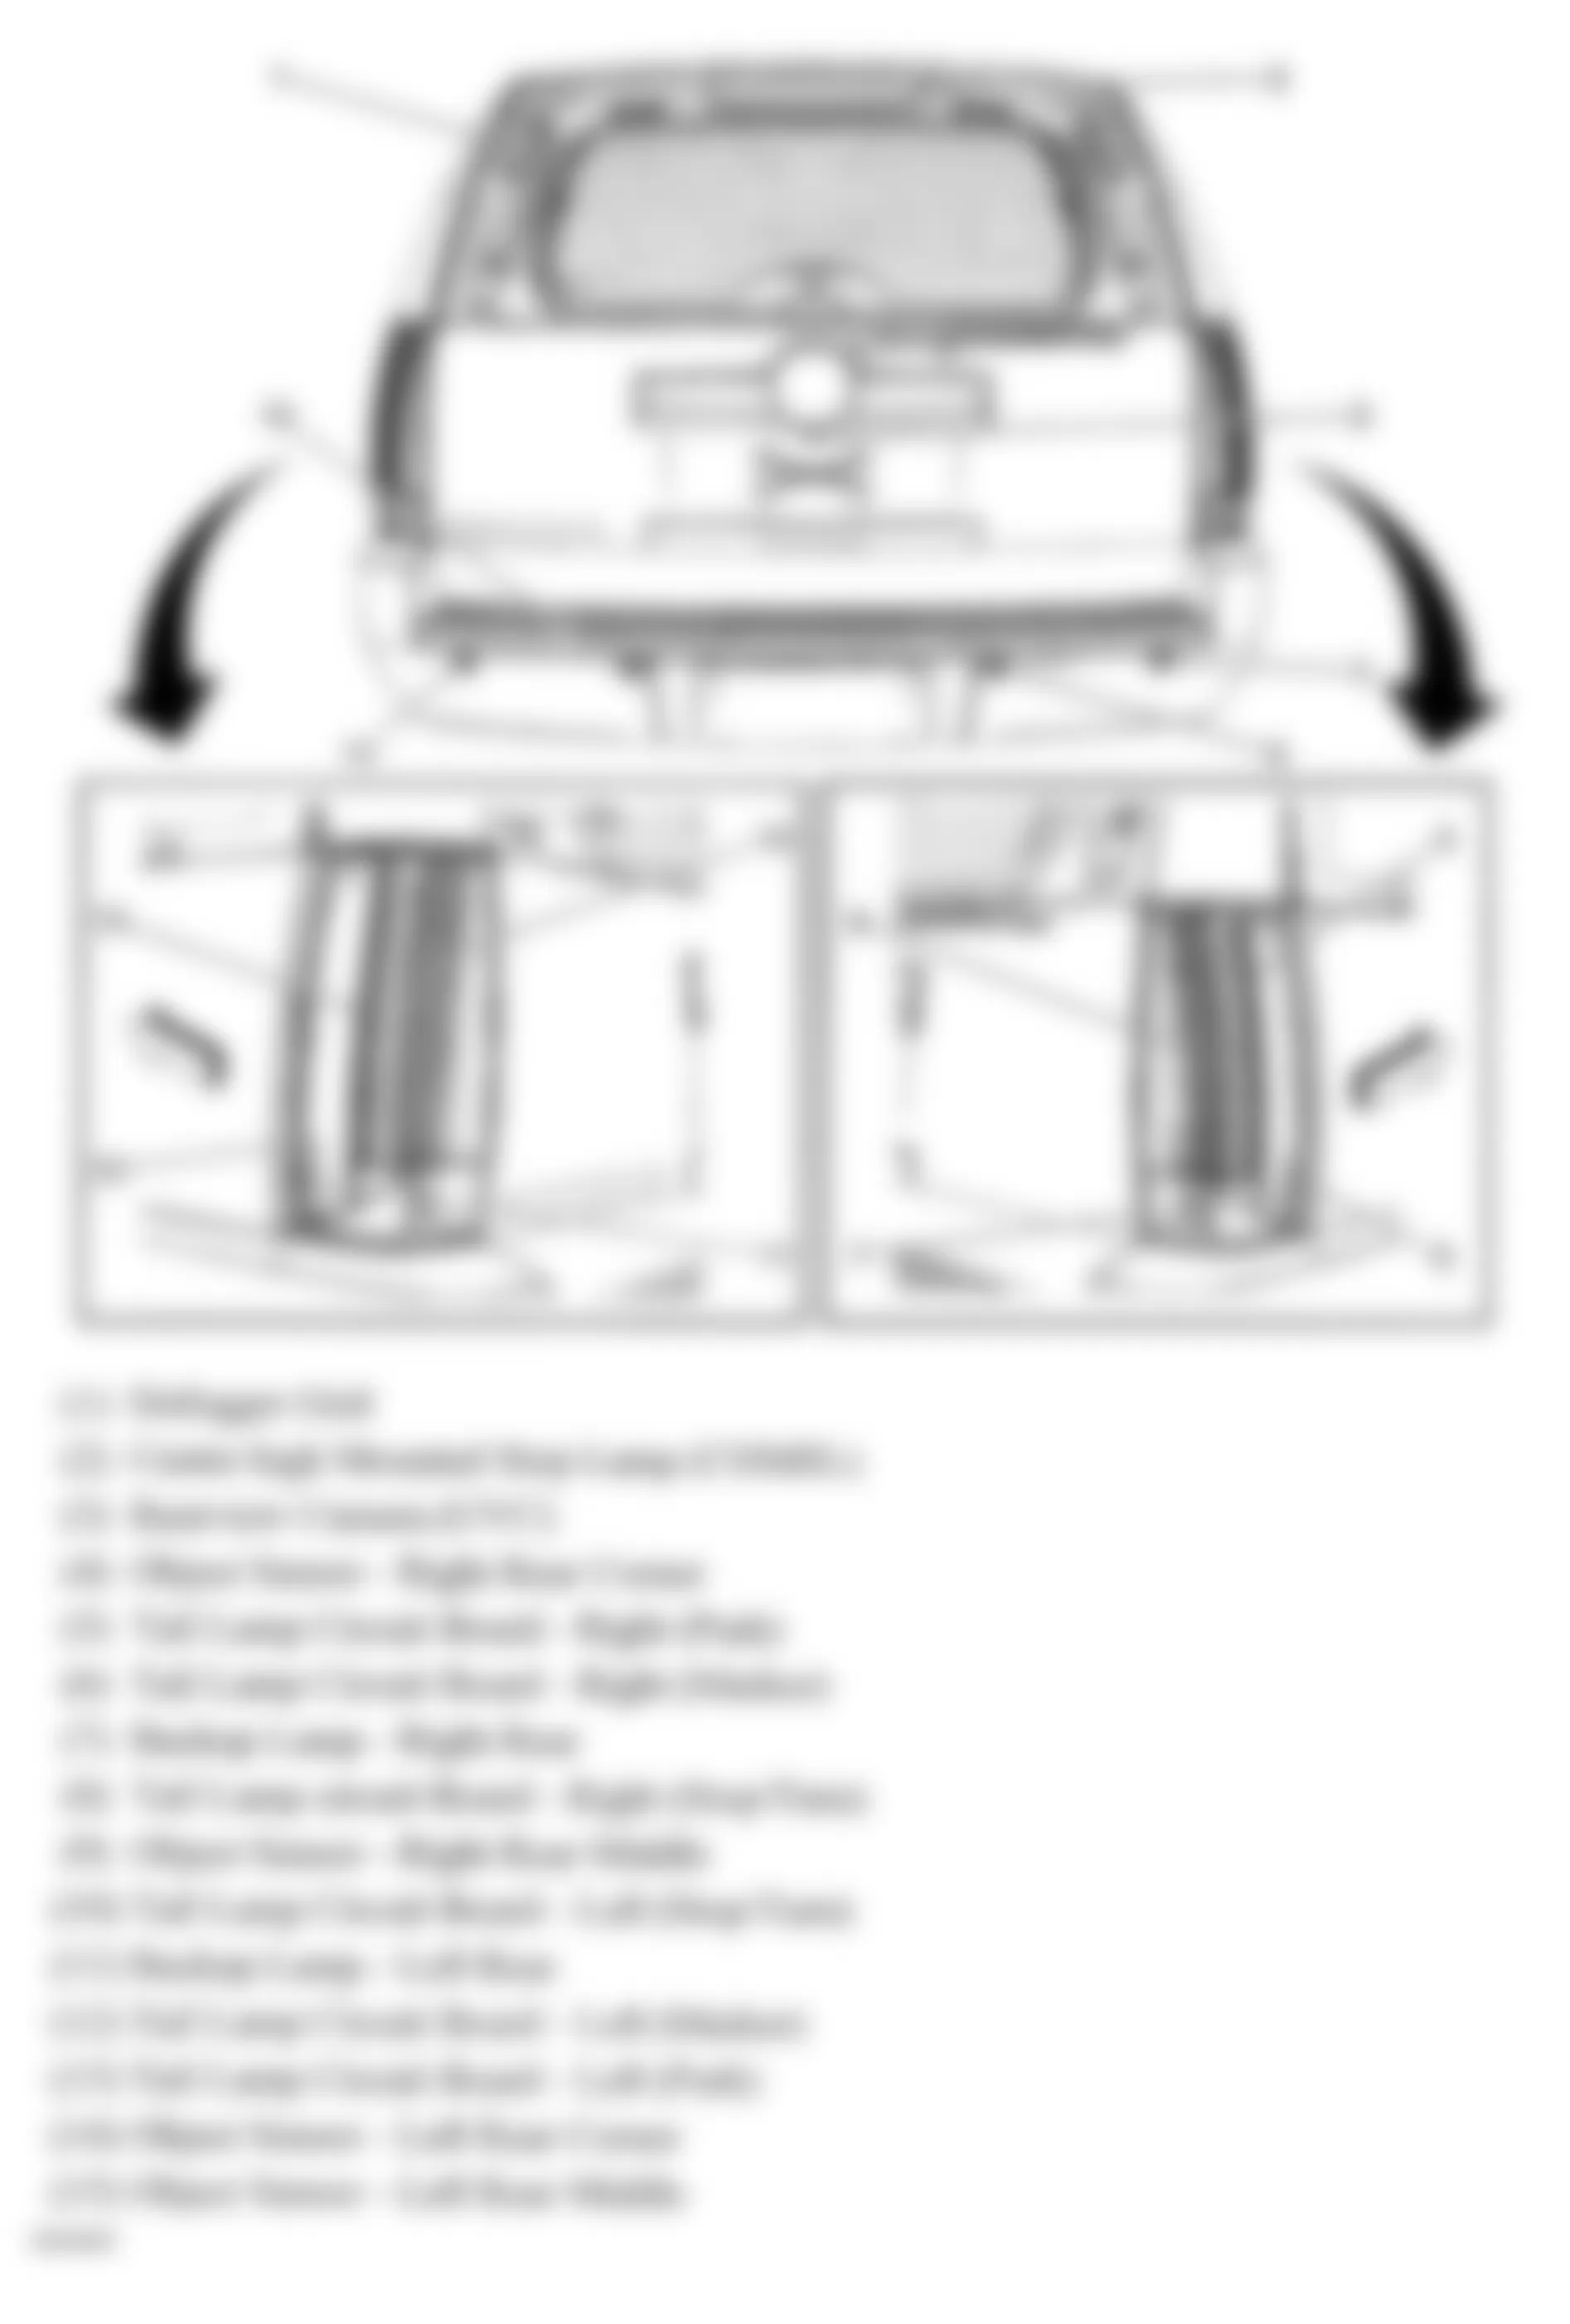 Chevrolet Avalanche 2008 - Component Locations -  Rear Of Vehicle (Tahoe & Escalade W/One Piece Liftgate)